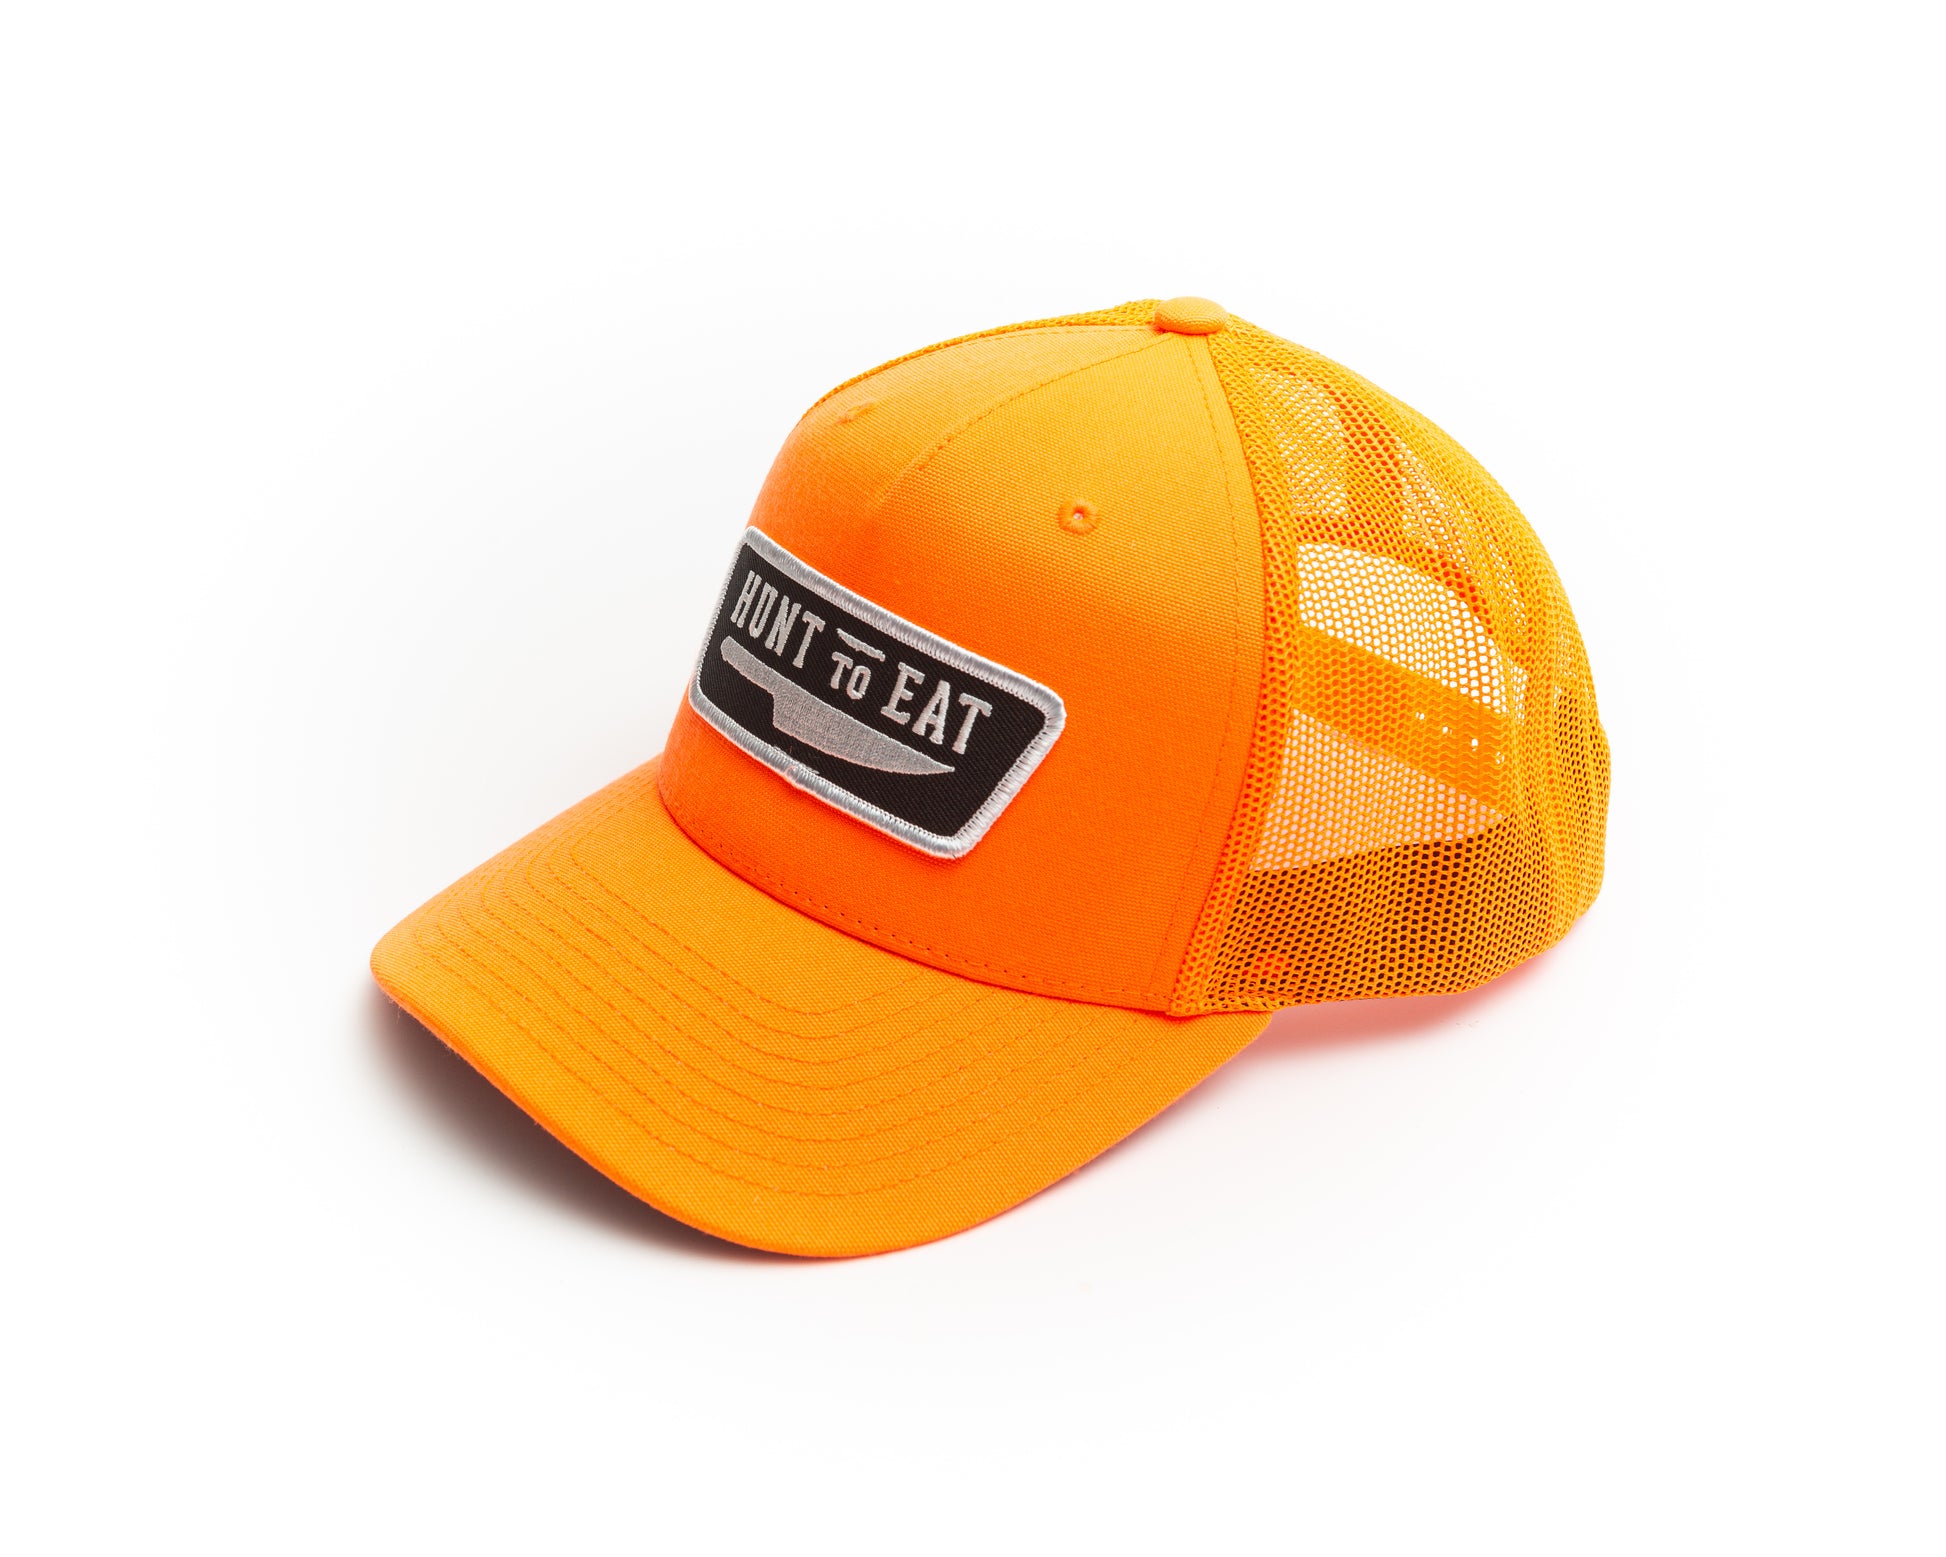 Blaze/safety Orange mesh back trucker cap.  decorated with the Hunt To Eat logo patch.  The patch contains the Hunt To Eat logo embroidered in white stitching on a black twill background surrounded by a white thread merrowed edge border. safety orange for staying visible while hunting during gun seasons. 